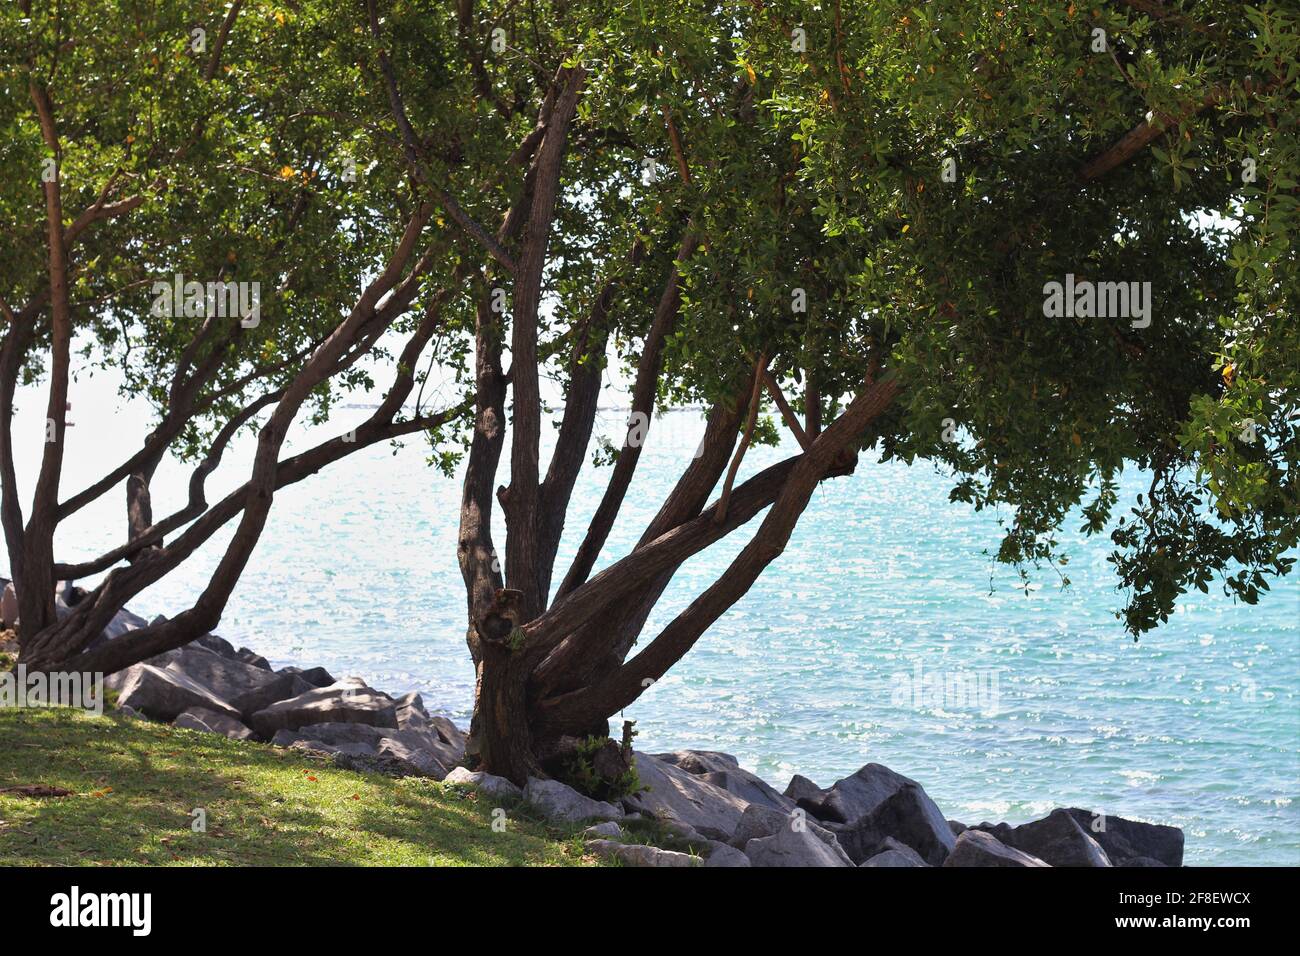 Background of trees growing on the coast line shore with shadows with blurred ocean water in the background. Stock Photo